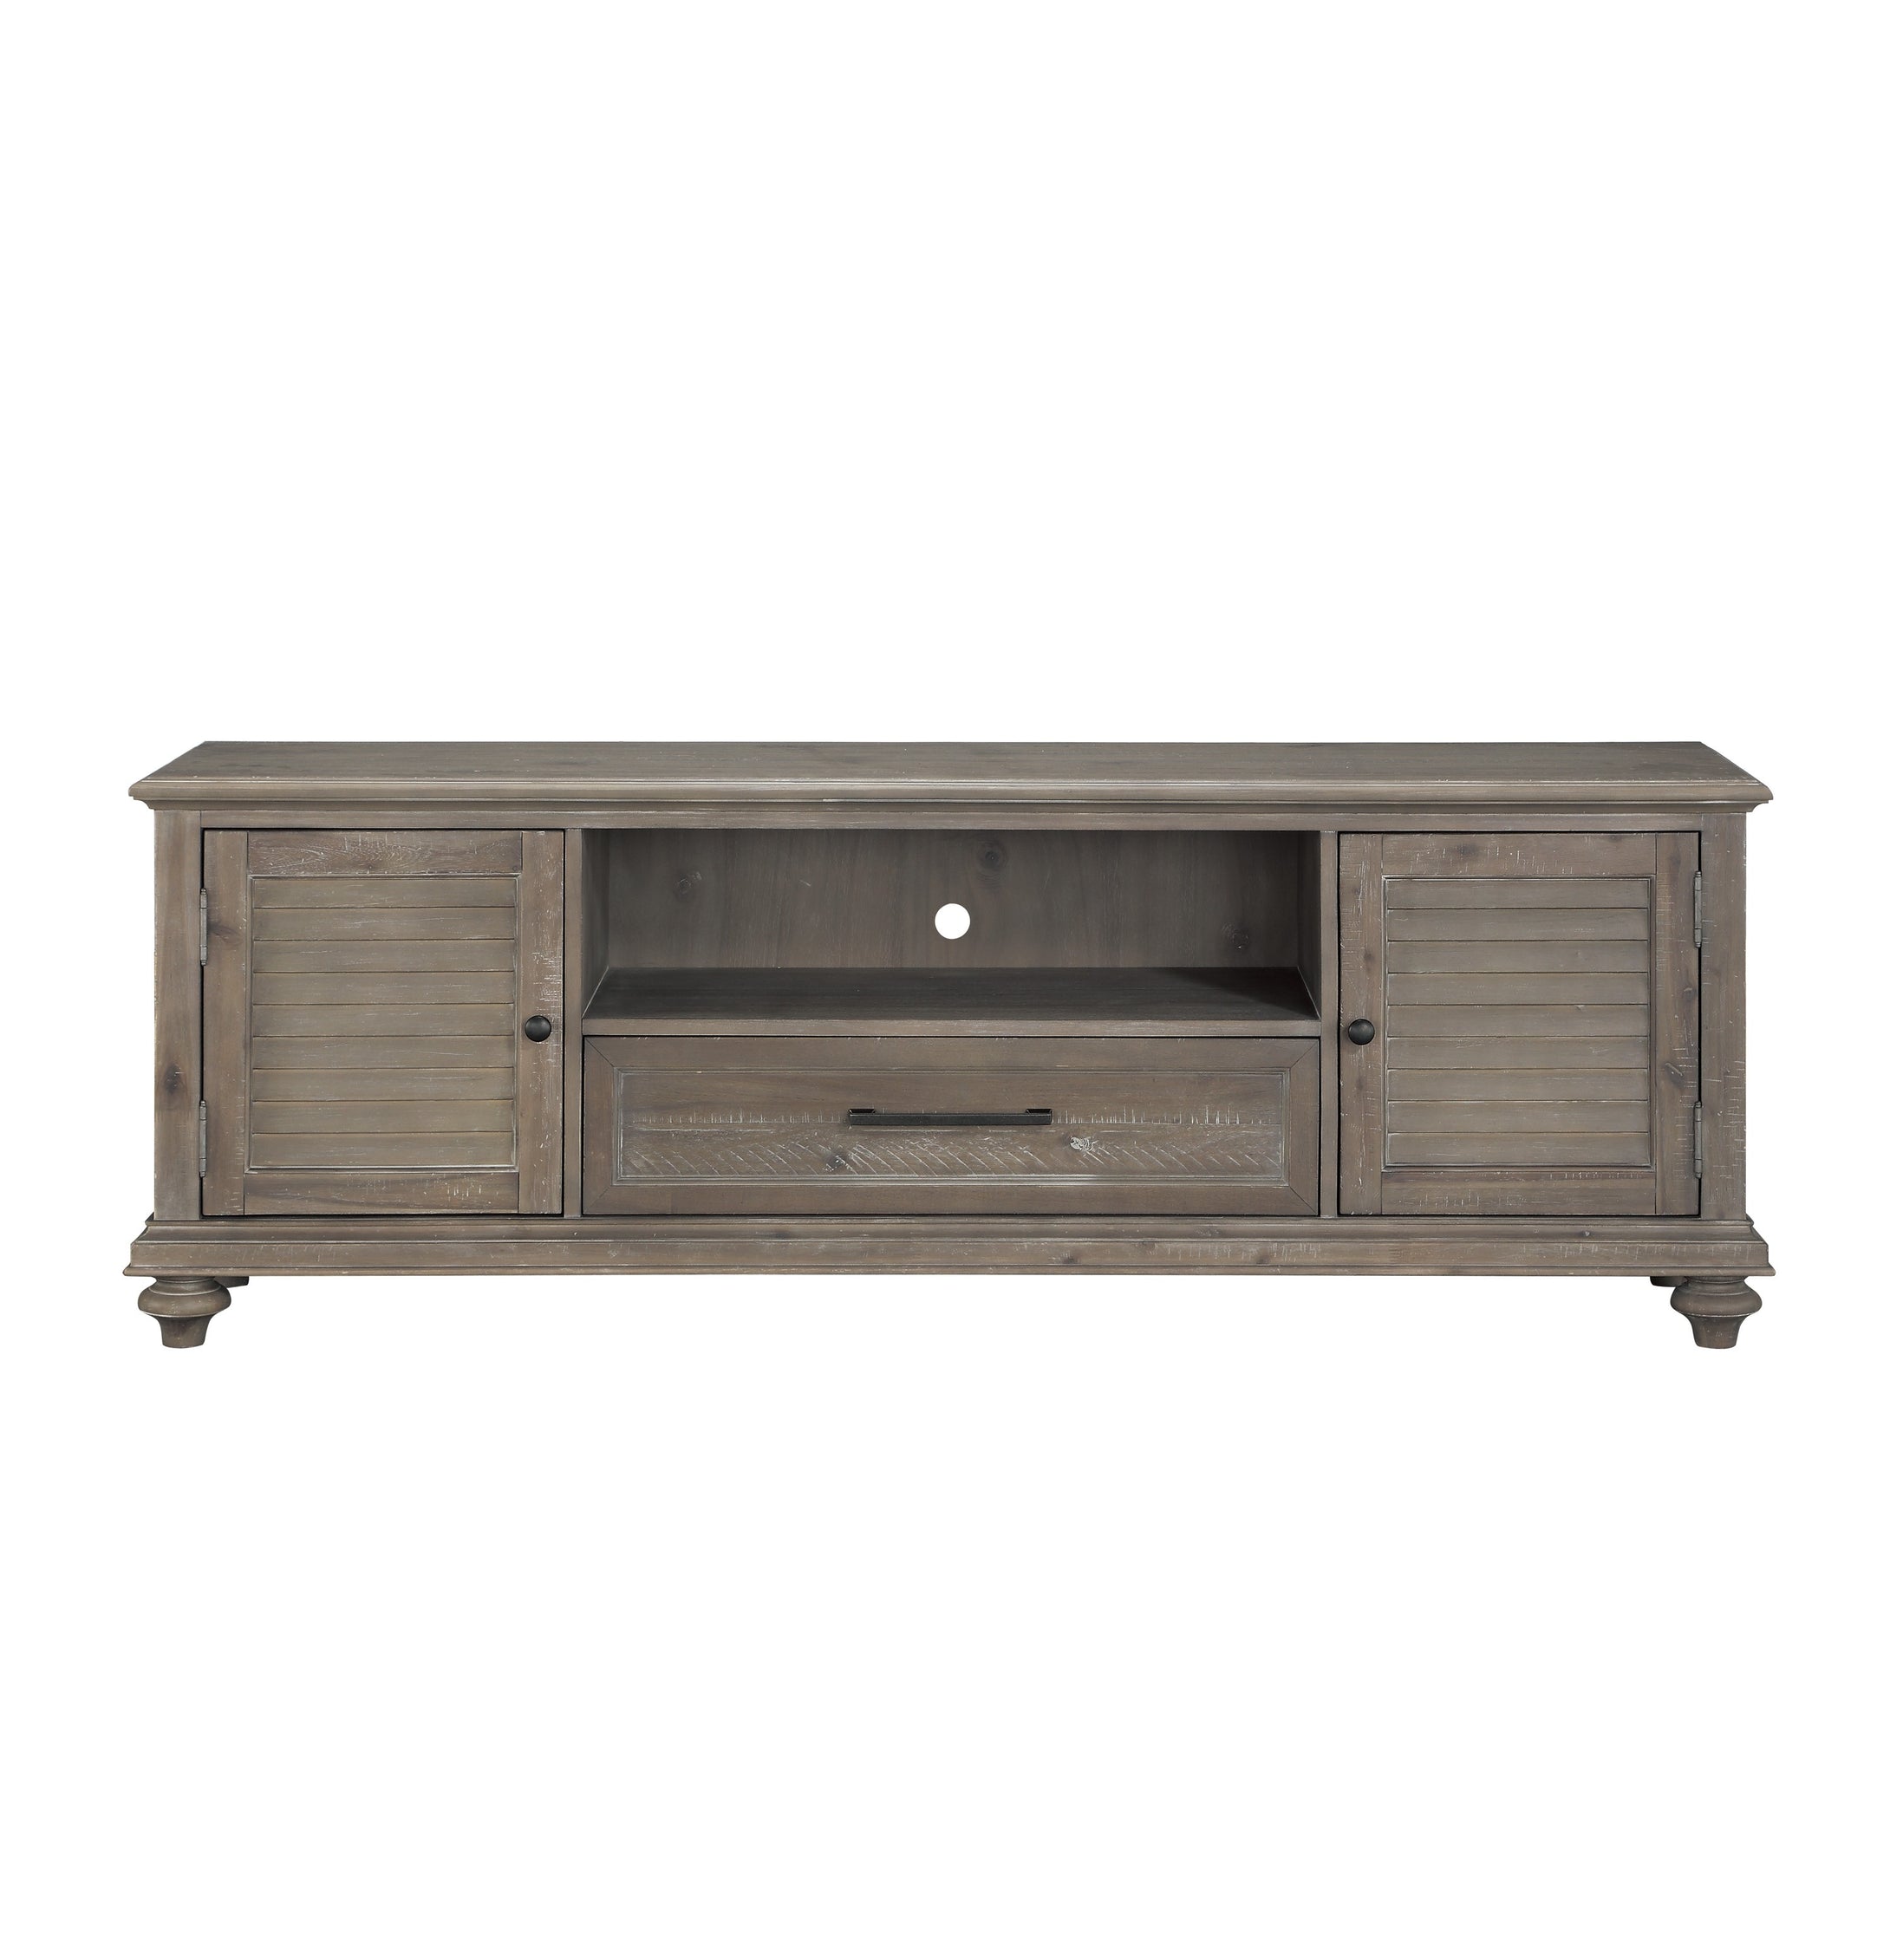 16890BR-72T TV Stand